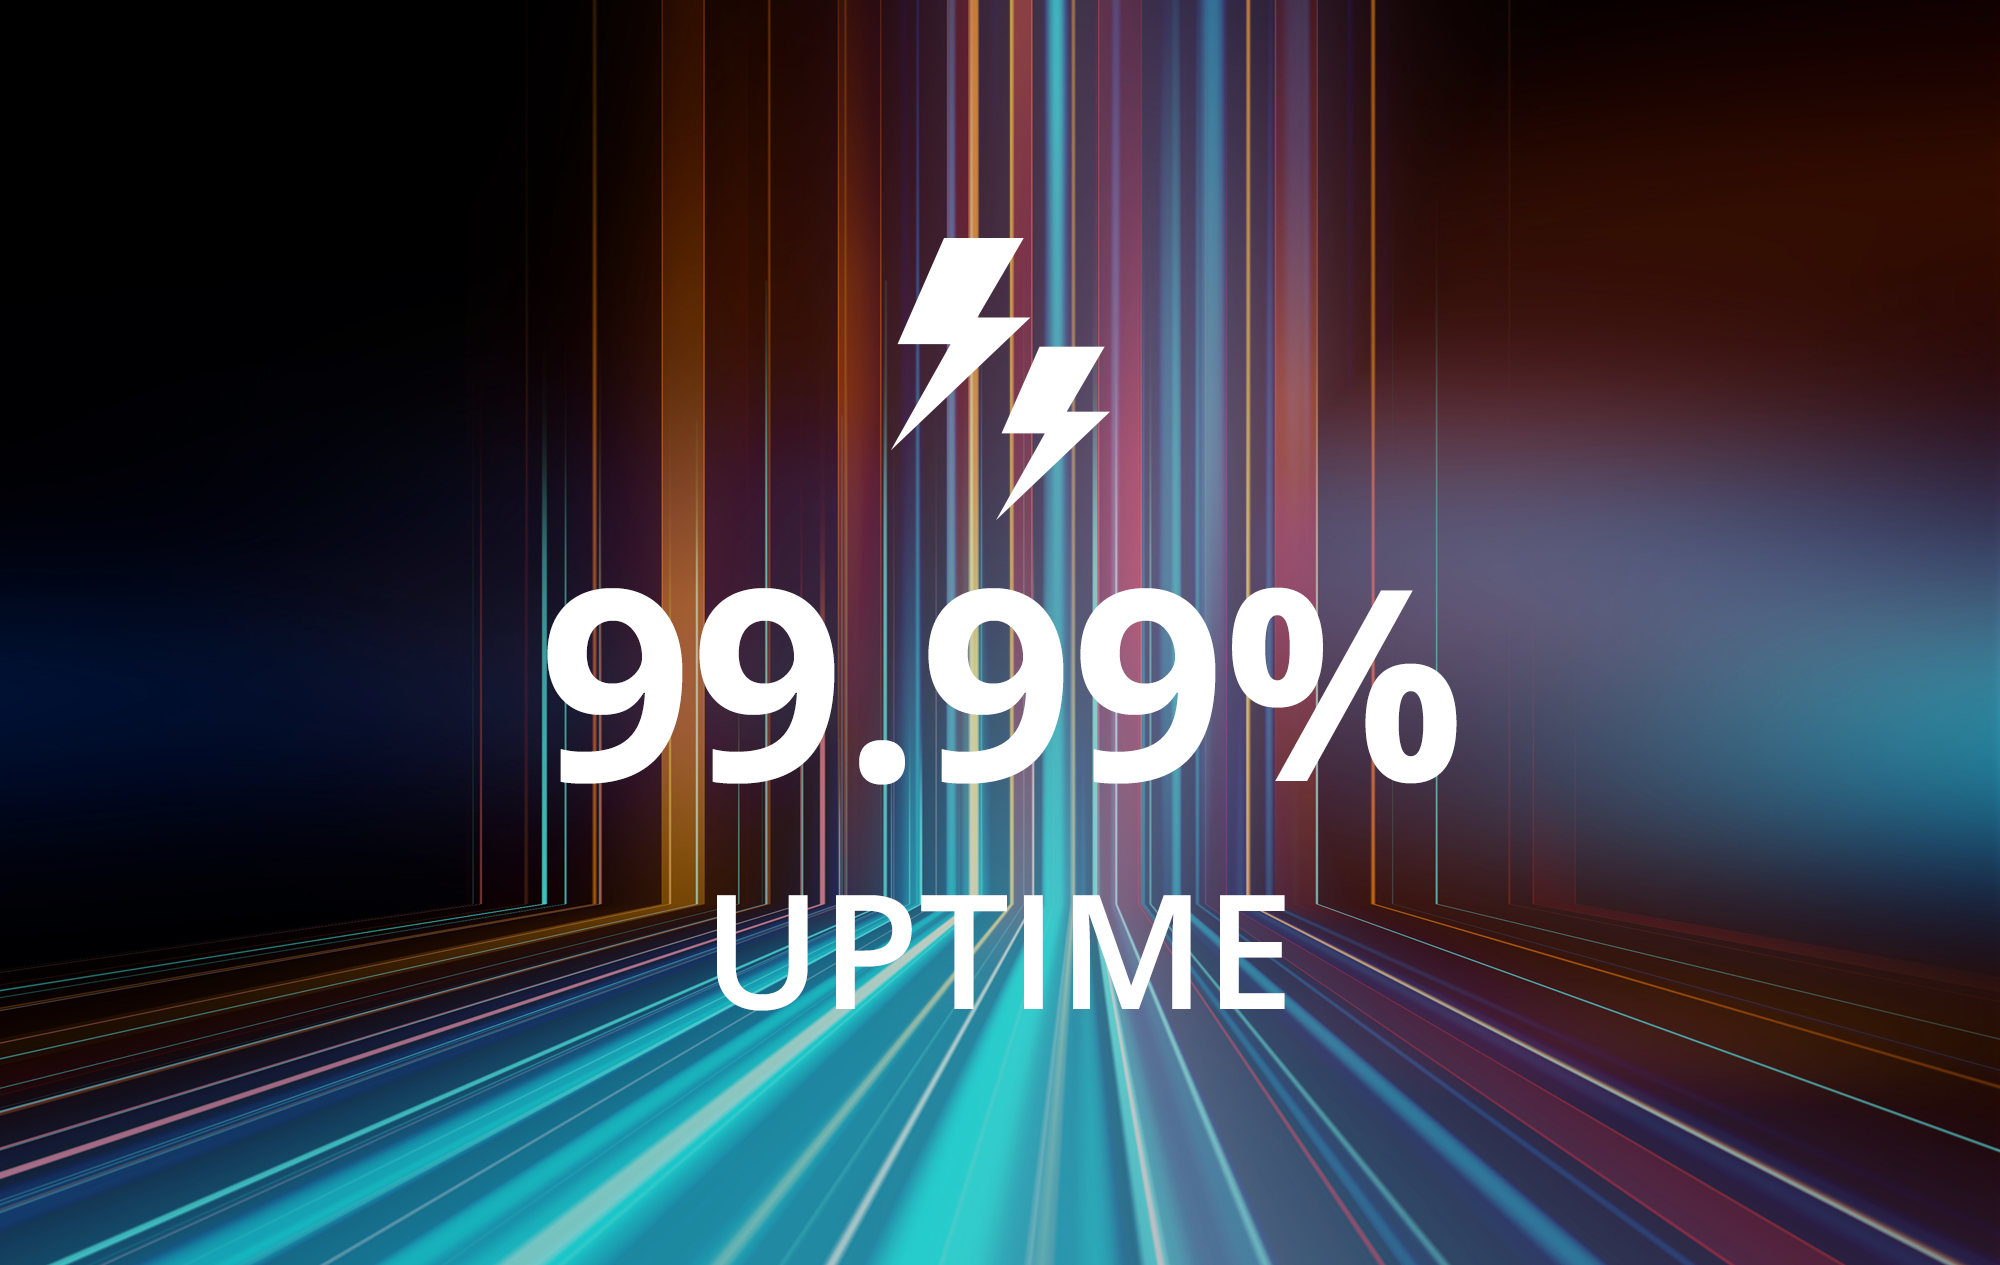 99.99% up time